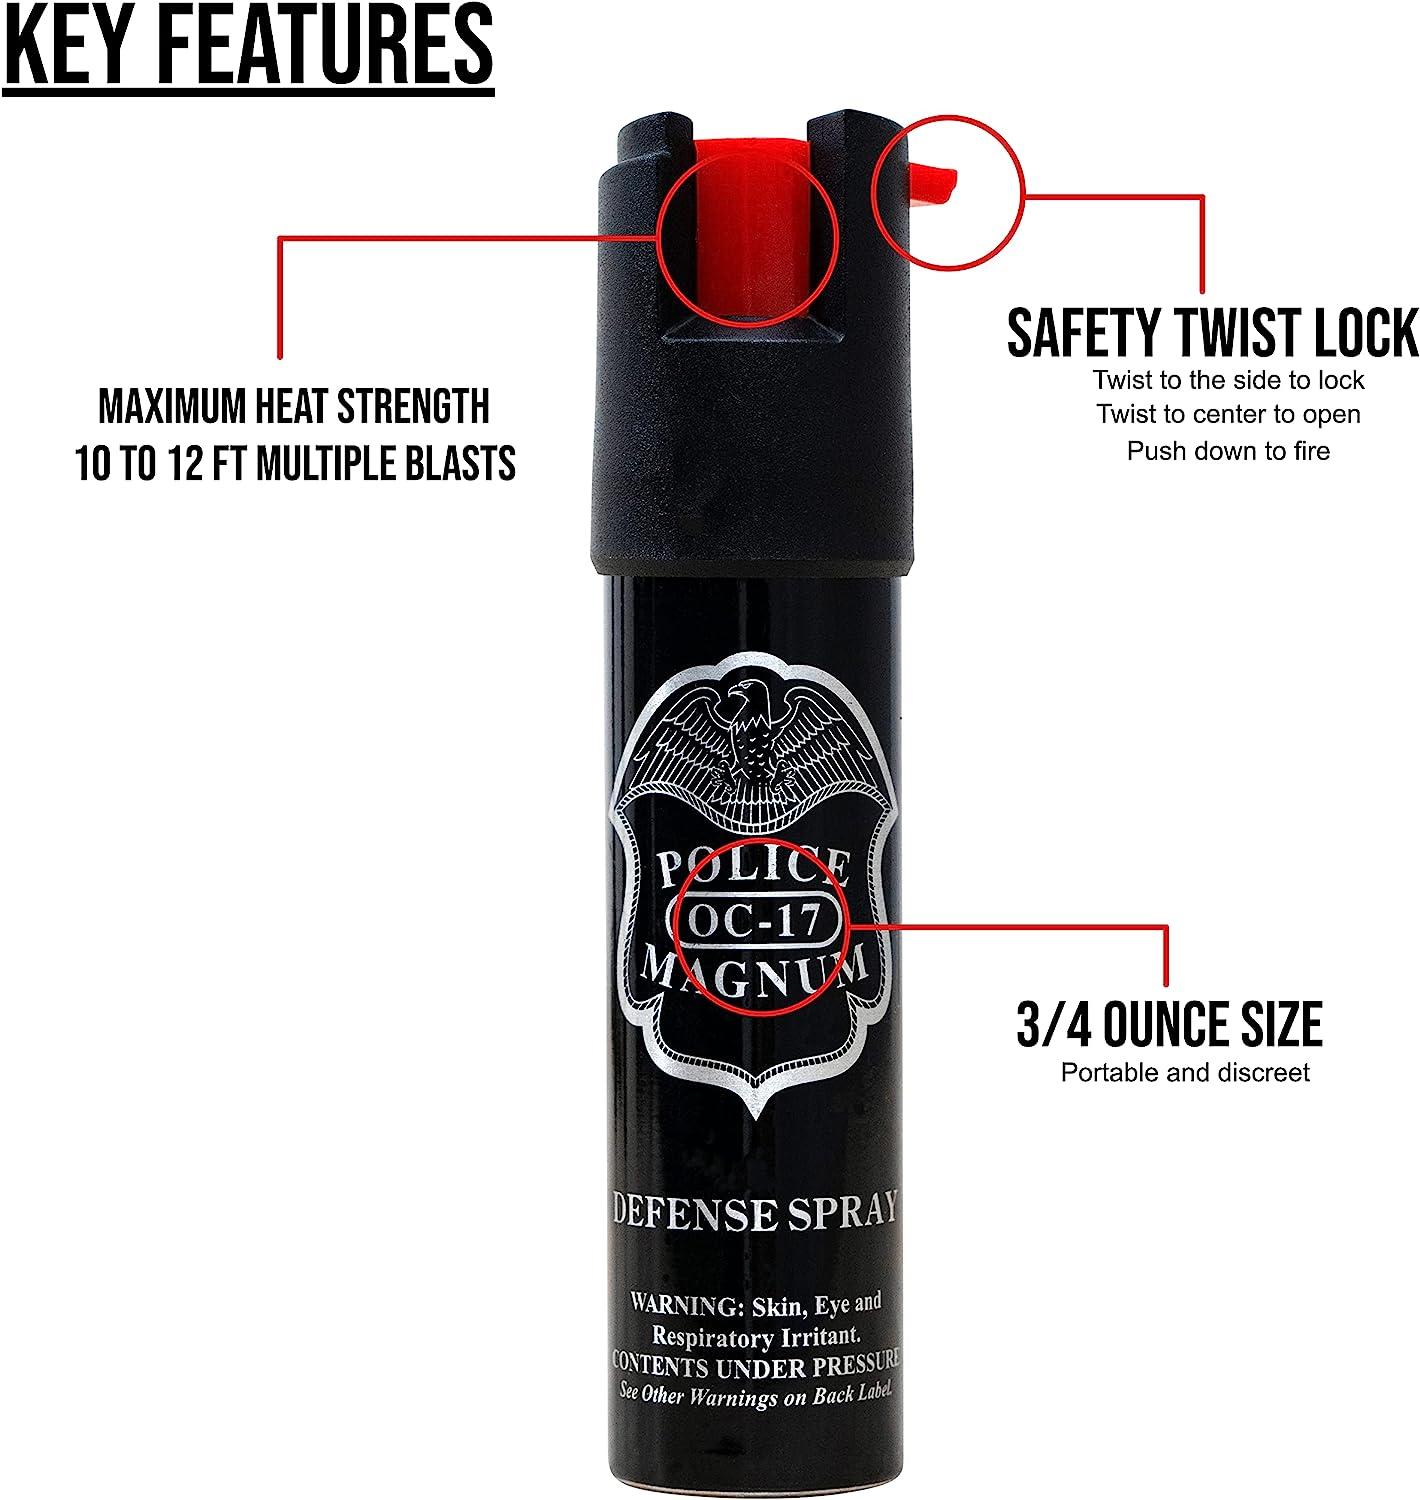 Police Magnum Compact Pepper Spray Self Defense- Tactical Maximum Heat  Strength OC- Small Discreet Carry Canister- Made in The USA 3 Pack